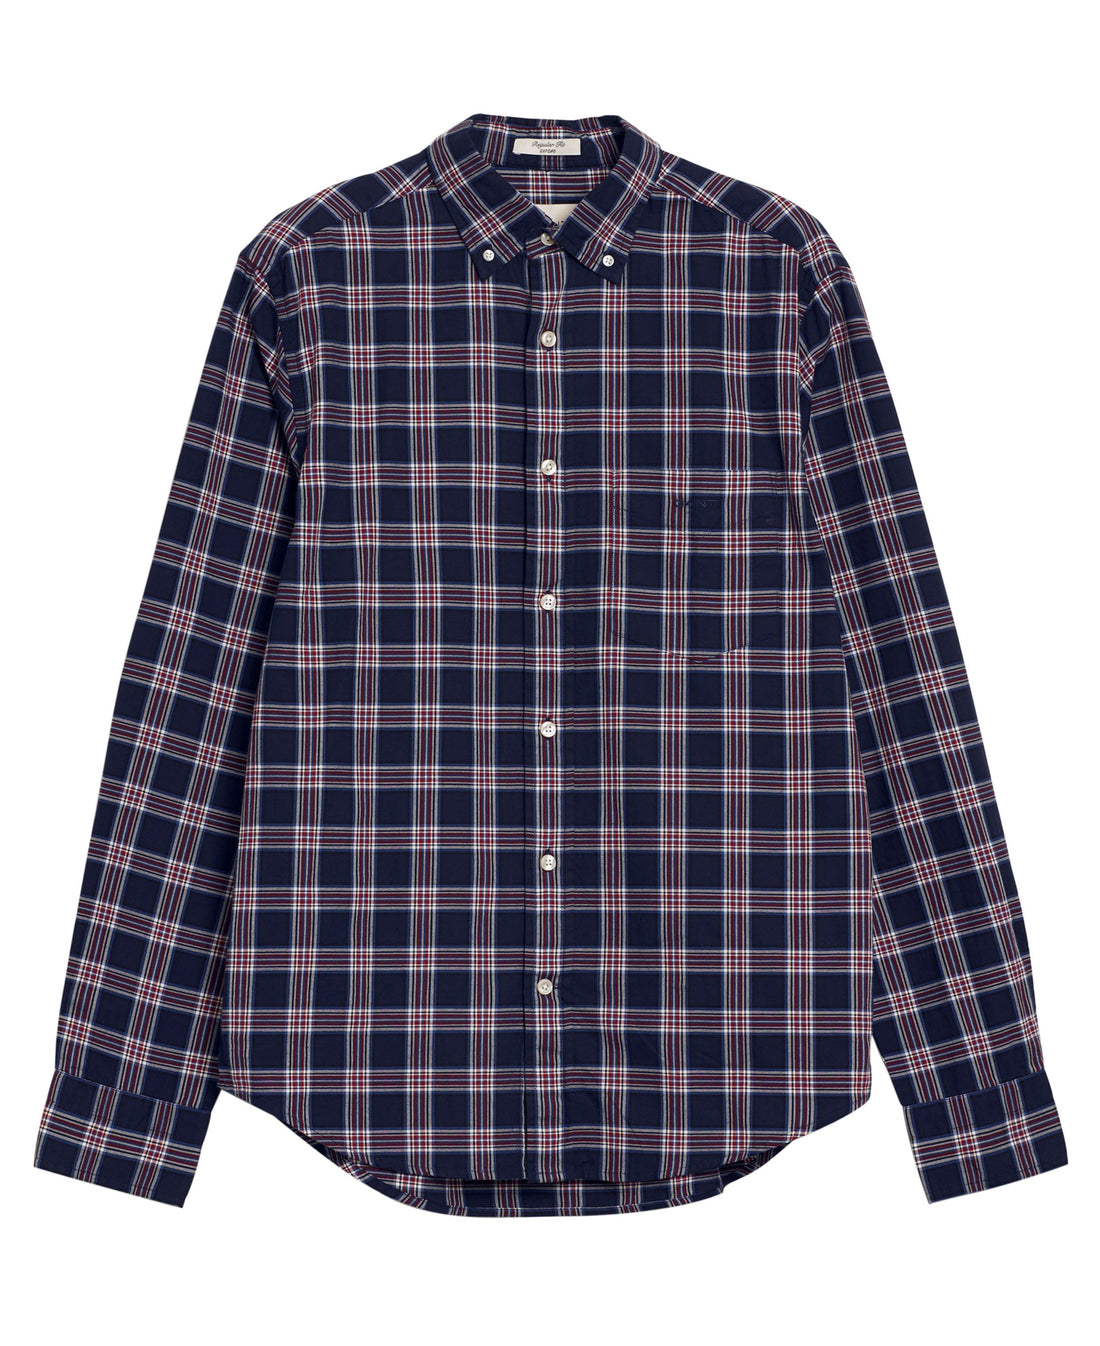 Regular Fit Archive Oxford Check Shirt - Classic Blue